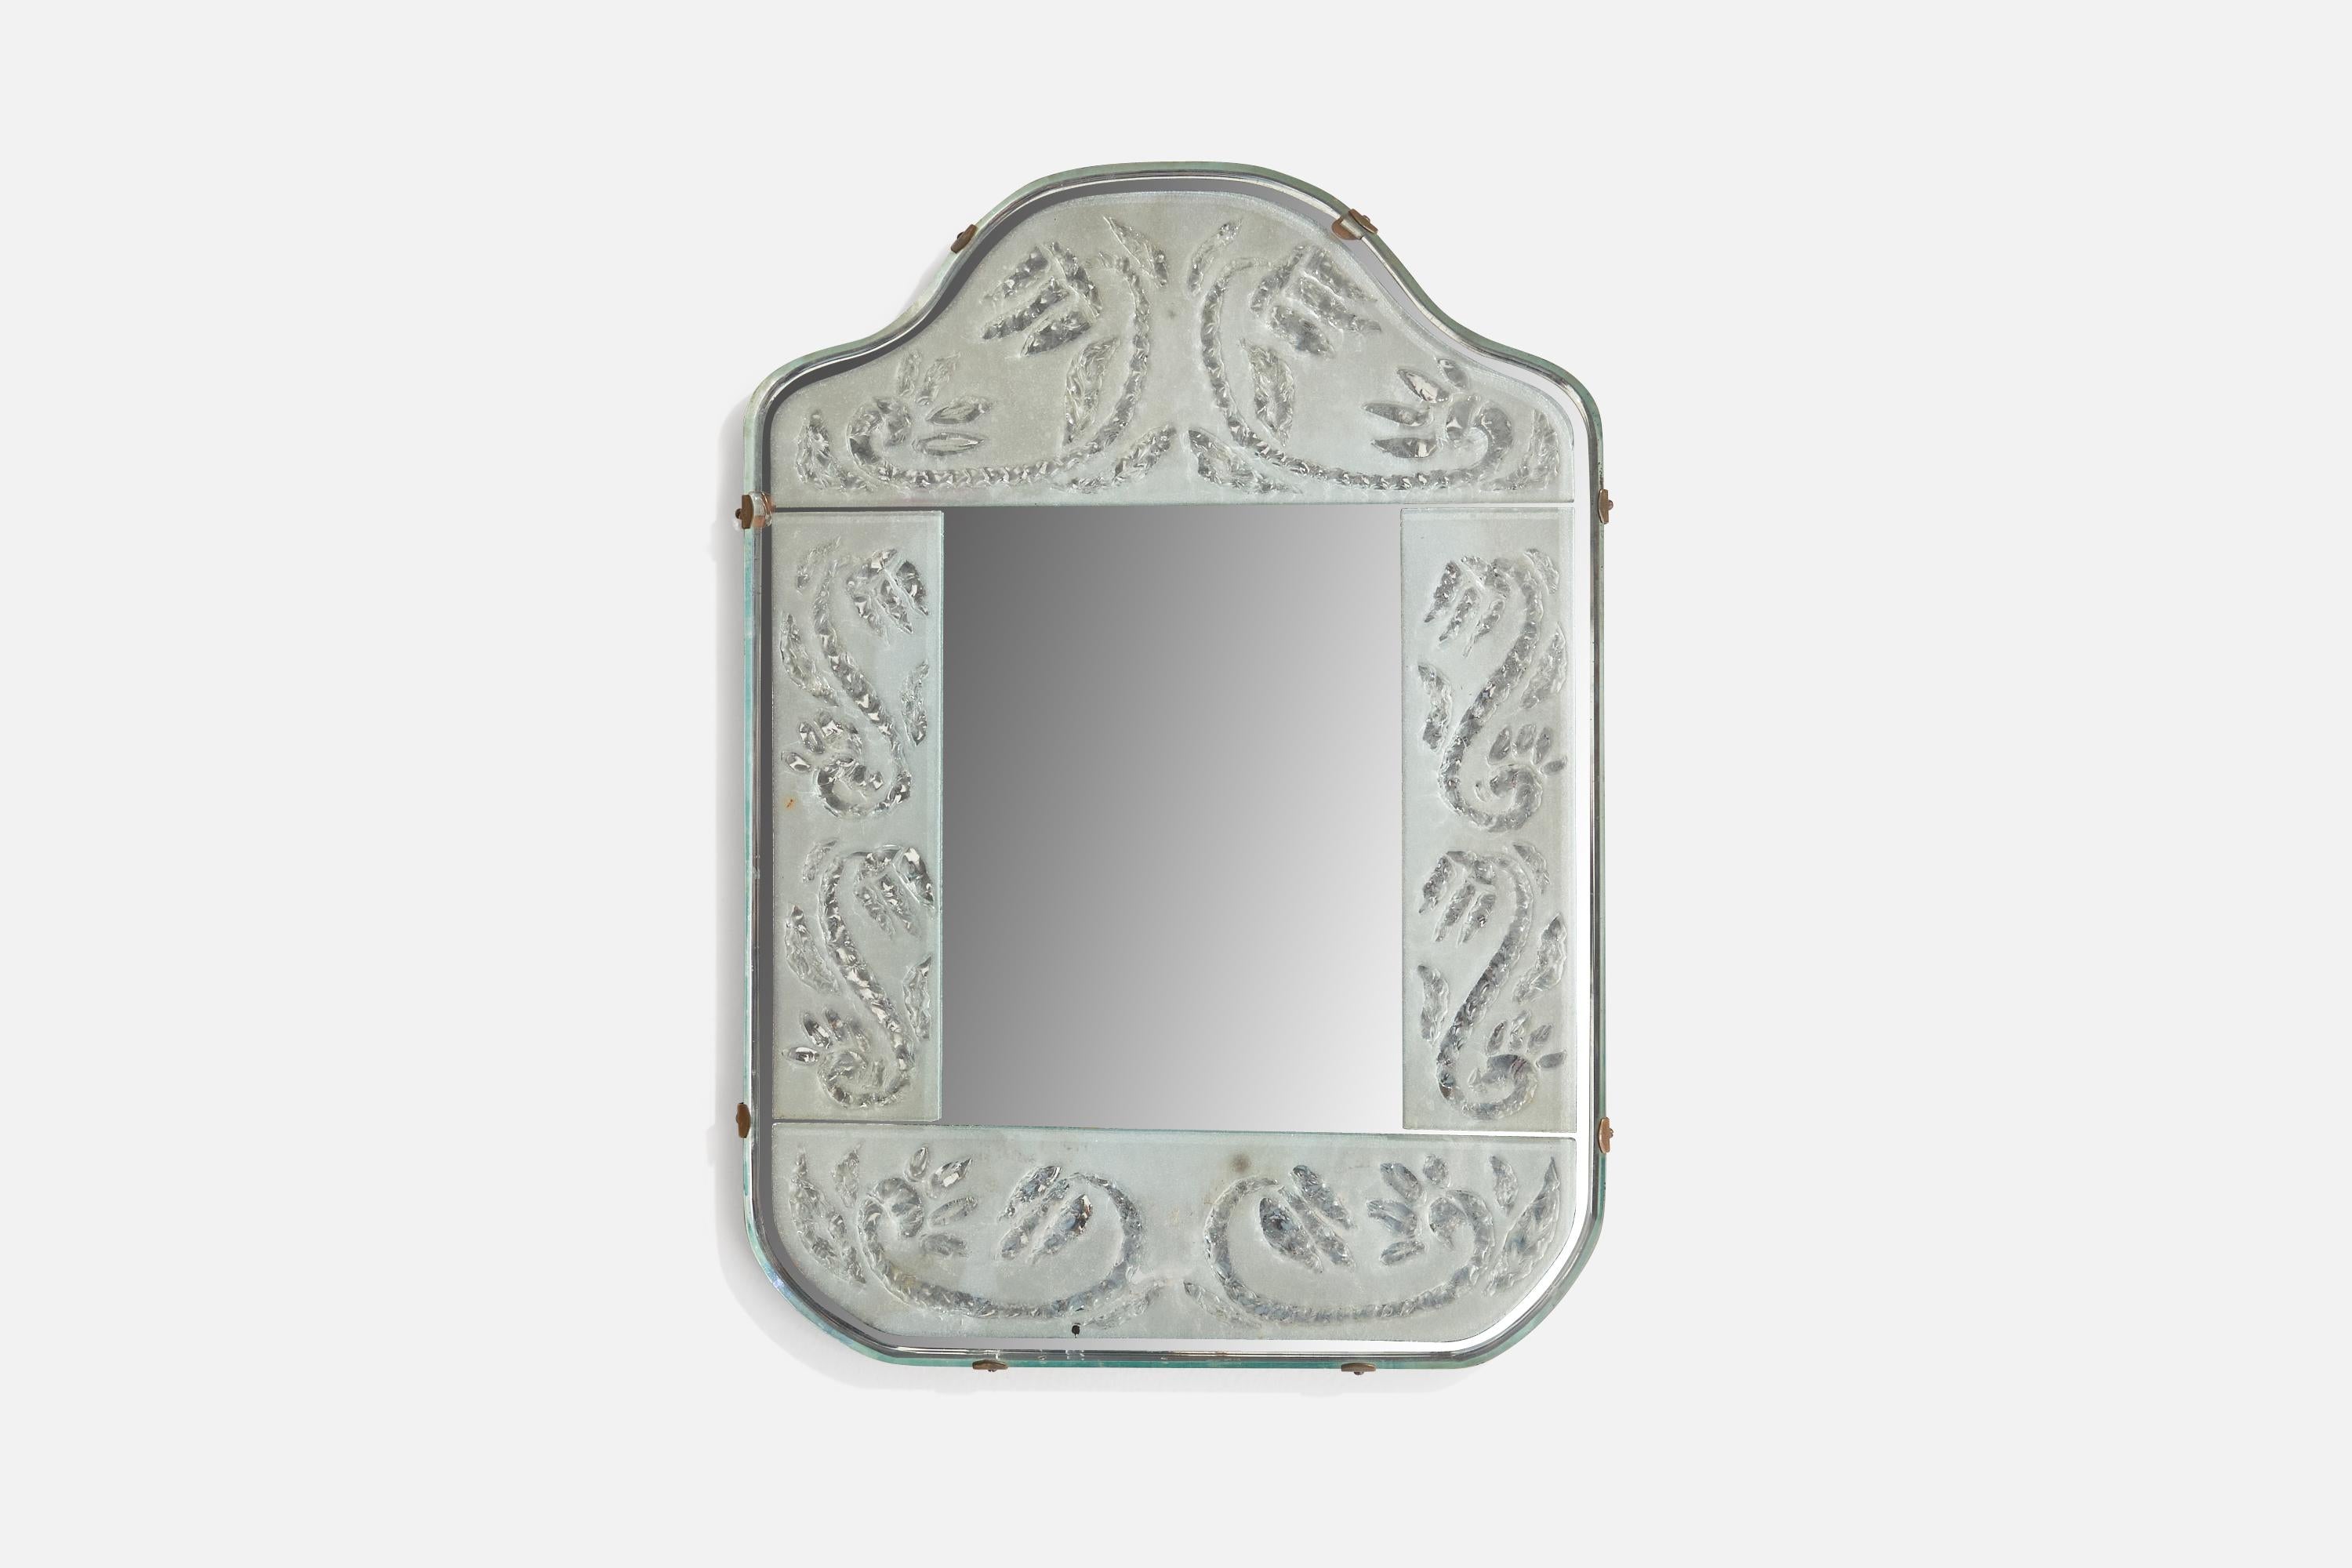 An etched glass wall mirror designed and produced by Eriksmålaglas, Sweden, 1960s.